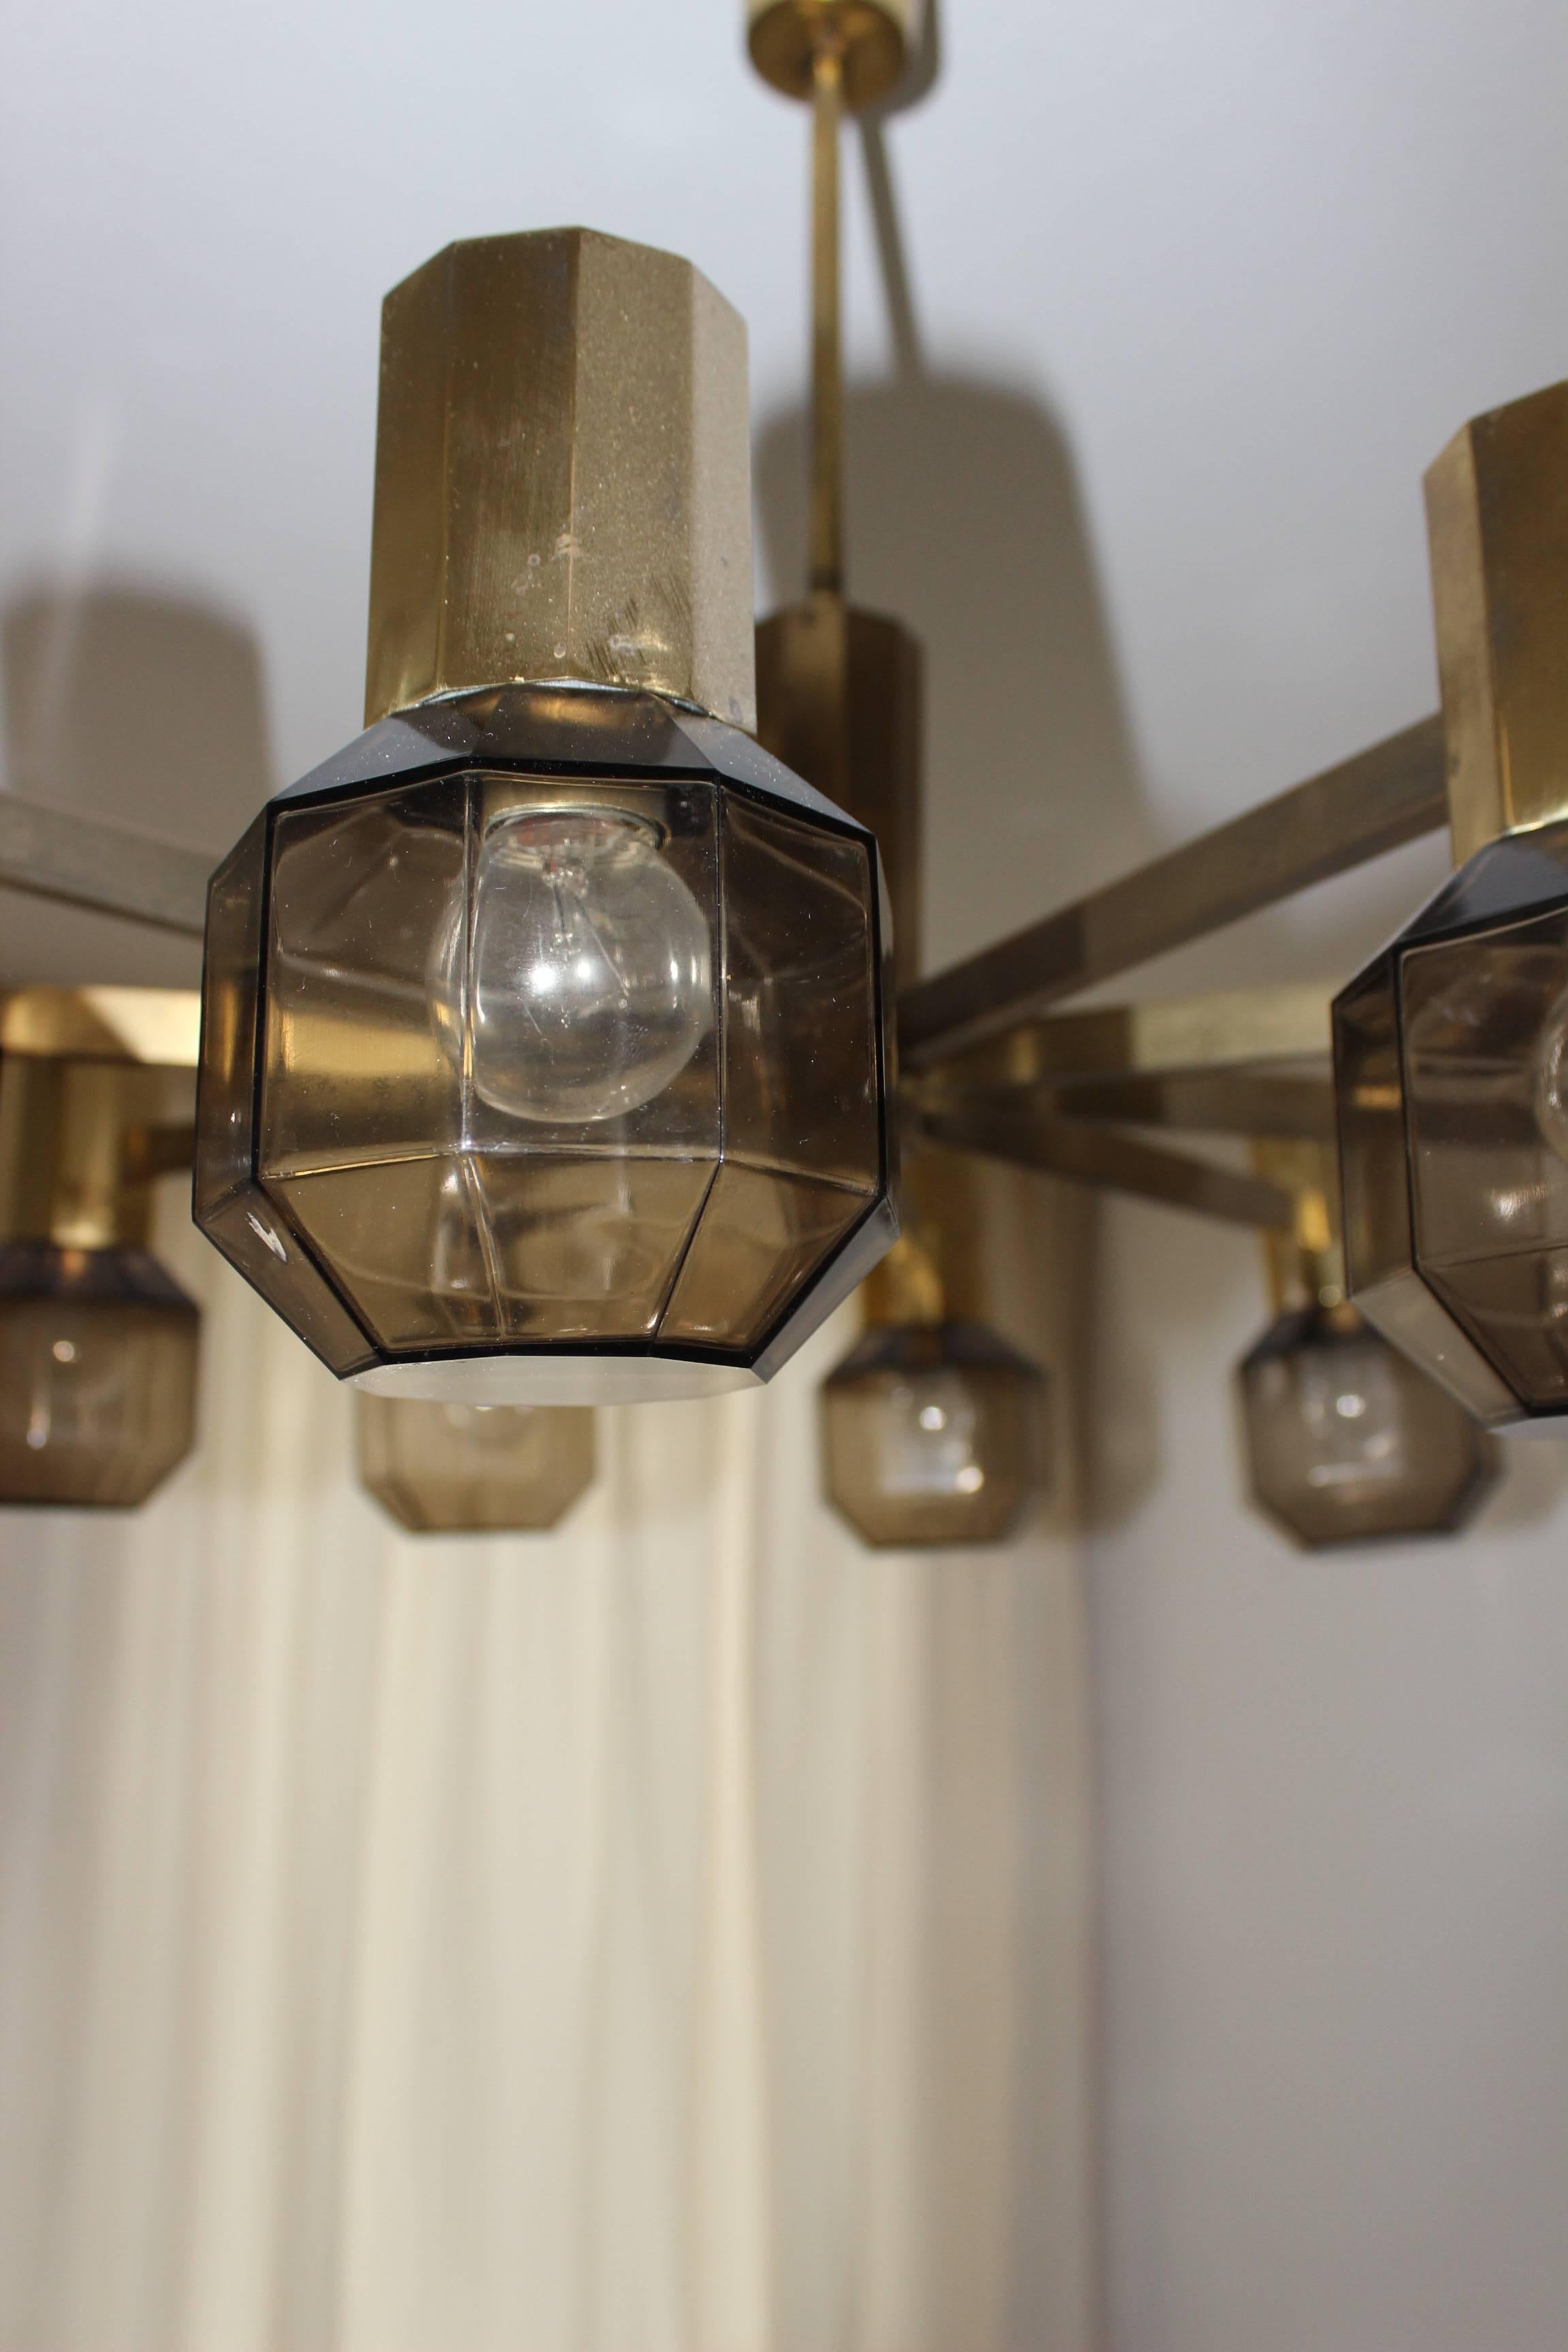  Brass Smoked Glass Chandelier in the Style of Hans-Agne Jakobsson

Large brass chandelier in the style of Hans-Agne Jakobsson with ten cubic smoked glass globes and the holders are facet shaped Brass. The combination of smoked glass and brass gives